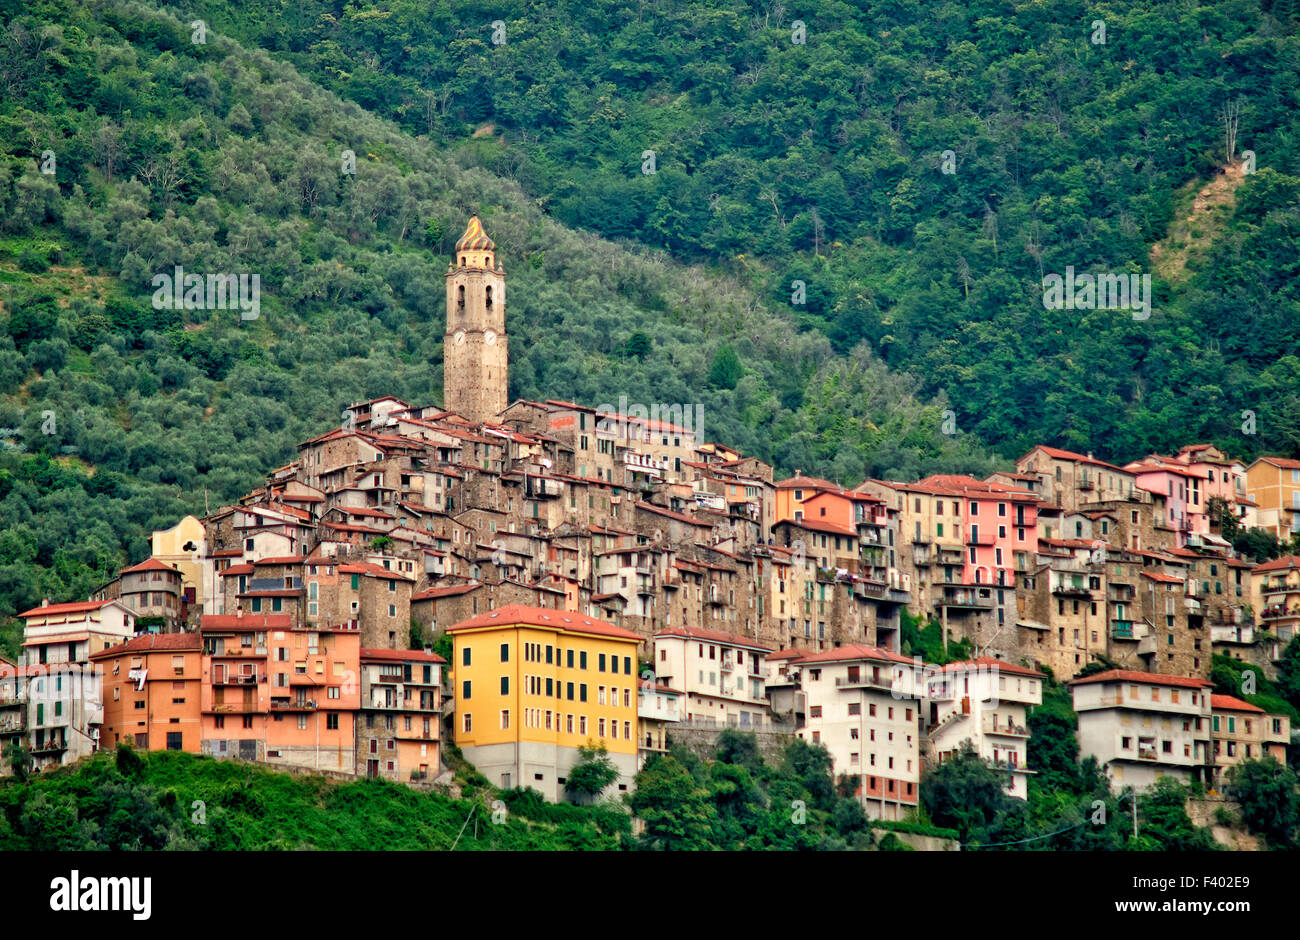 Small medieval town Castel Vittorio in Italy Stock Photo